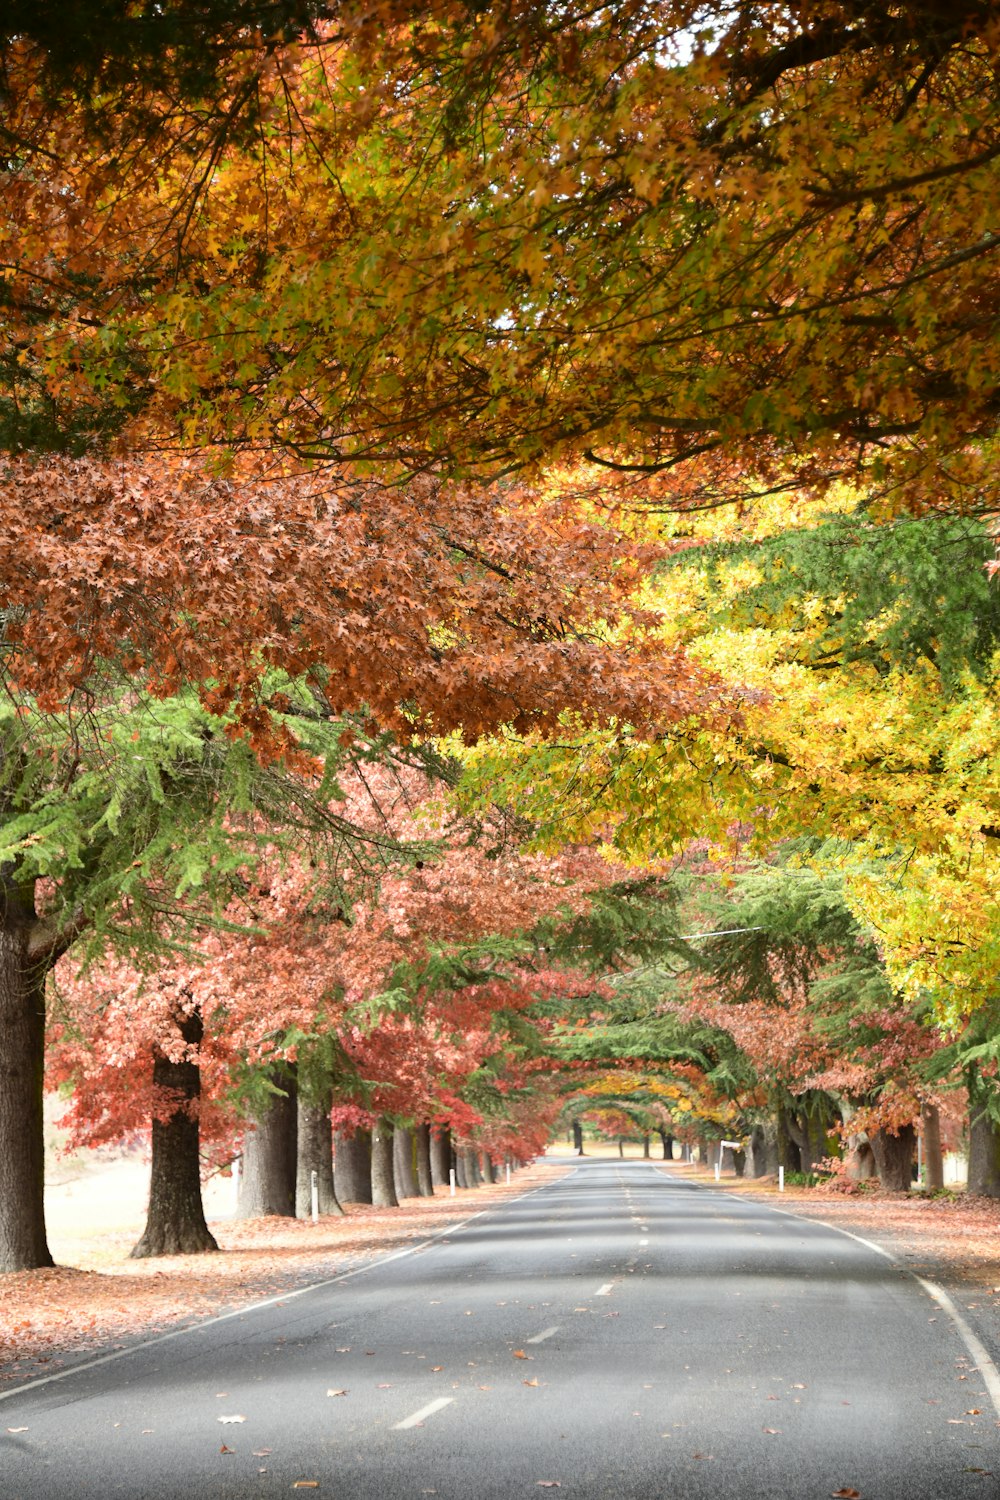 a street lined with trees with orange and yellow leaves